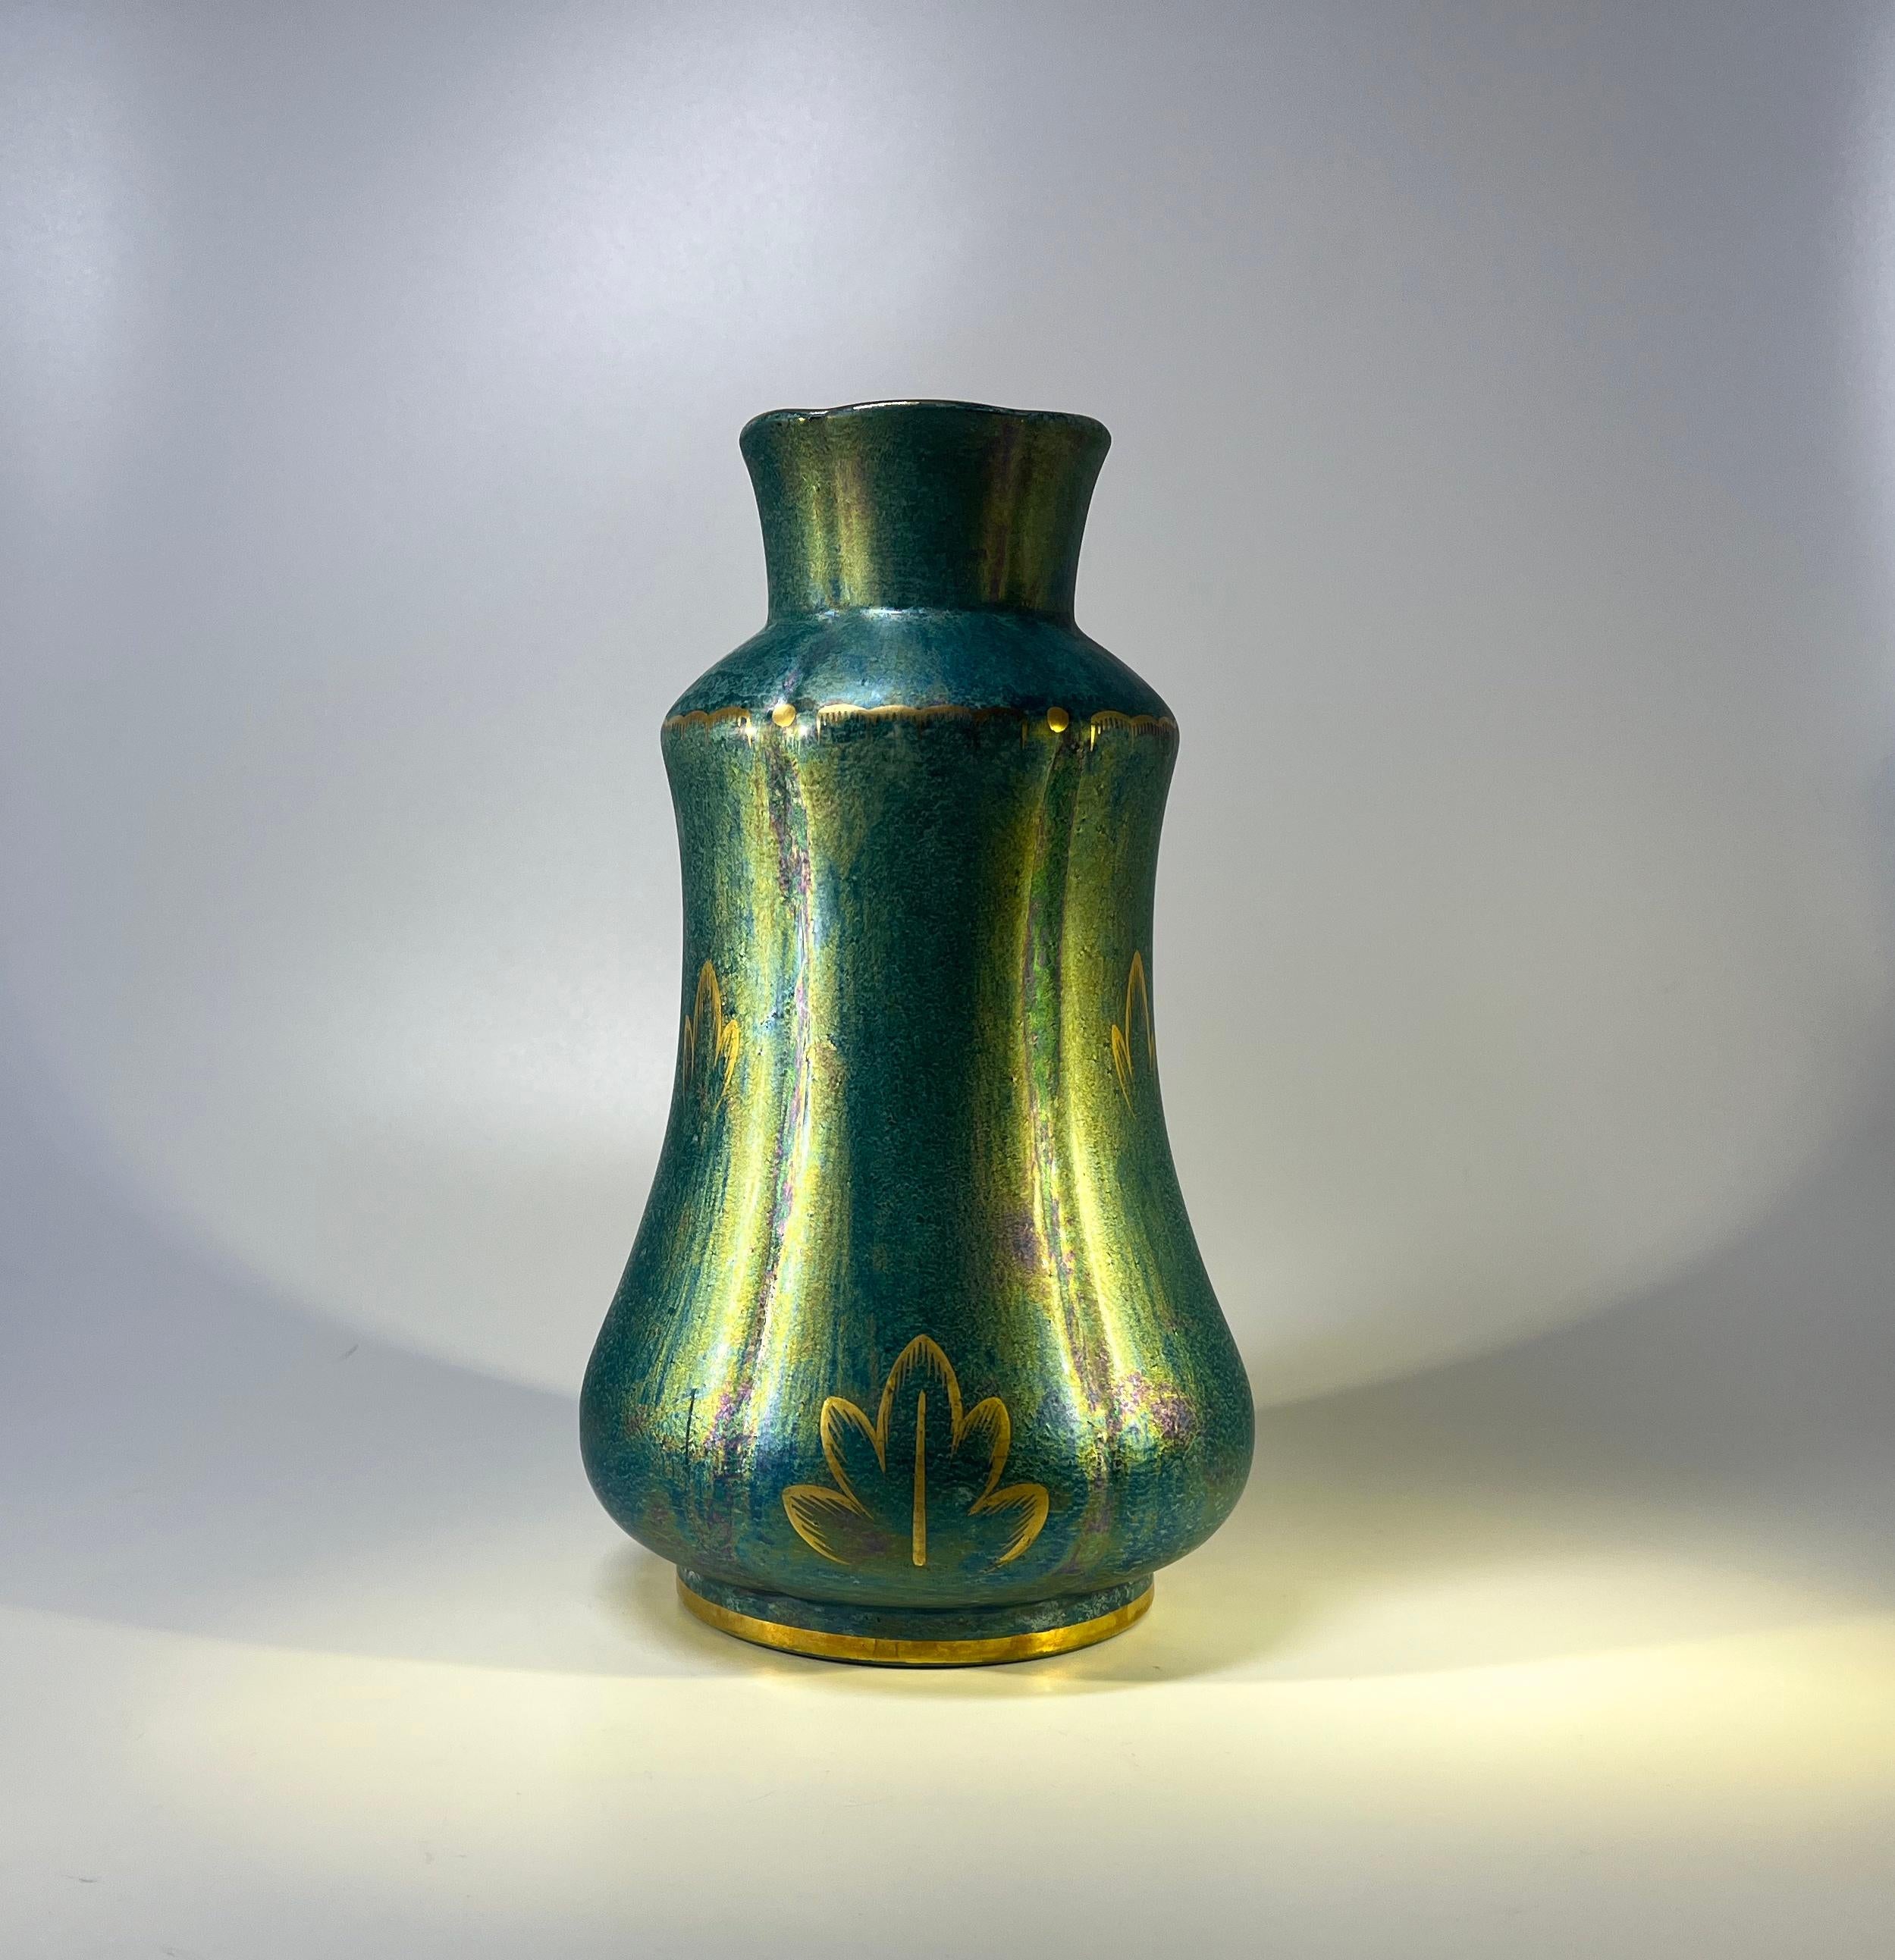 Sea green ethereal lustre glaze with hand decorated gilt motifs decorate this superb vase by Josef Ekberg for Gustavsberg. 
An extremely impressive Art Deco piece and a fine example of Ekberg's craftsmanship.
Signed and Anchor mark to